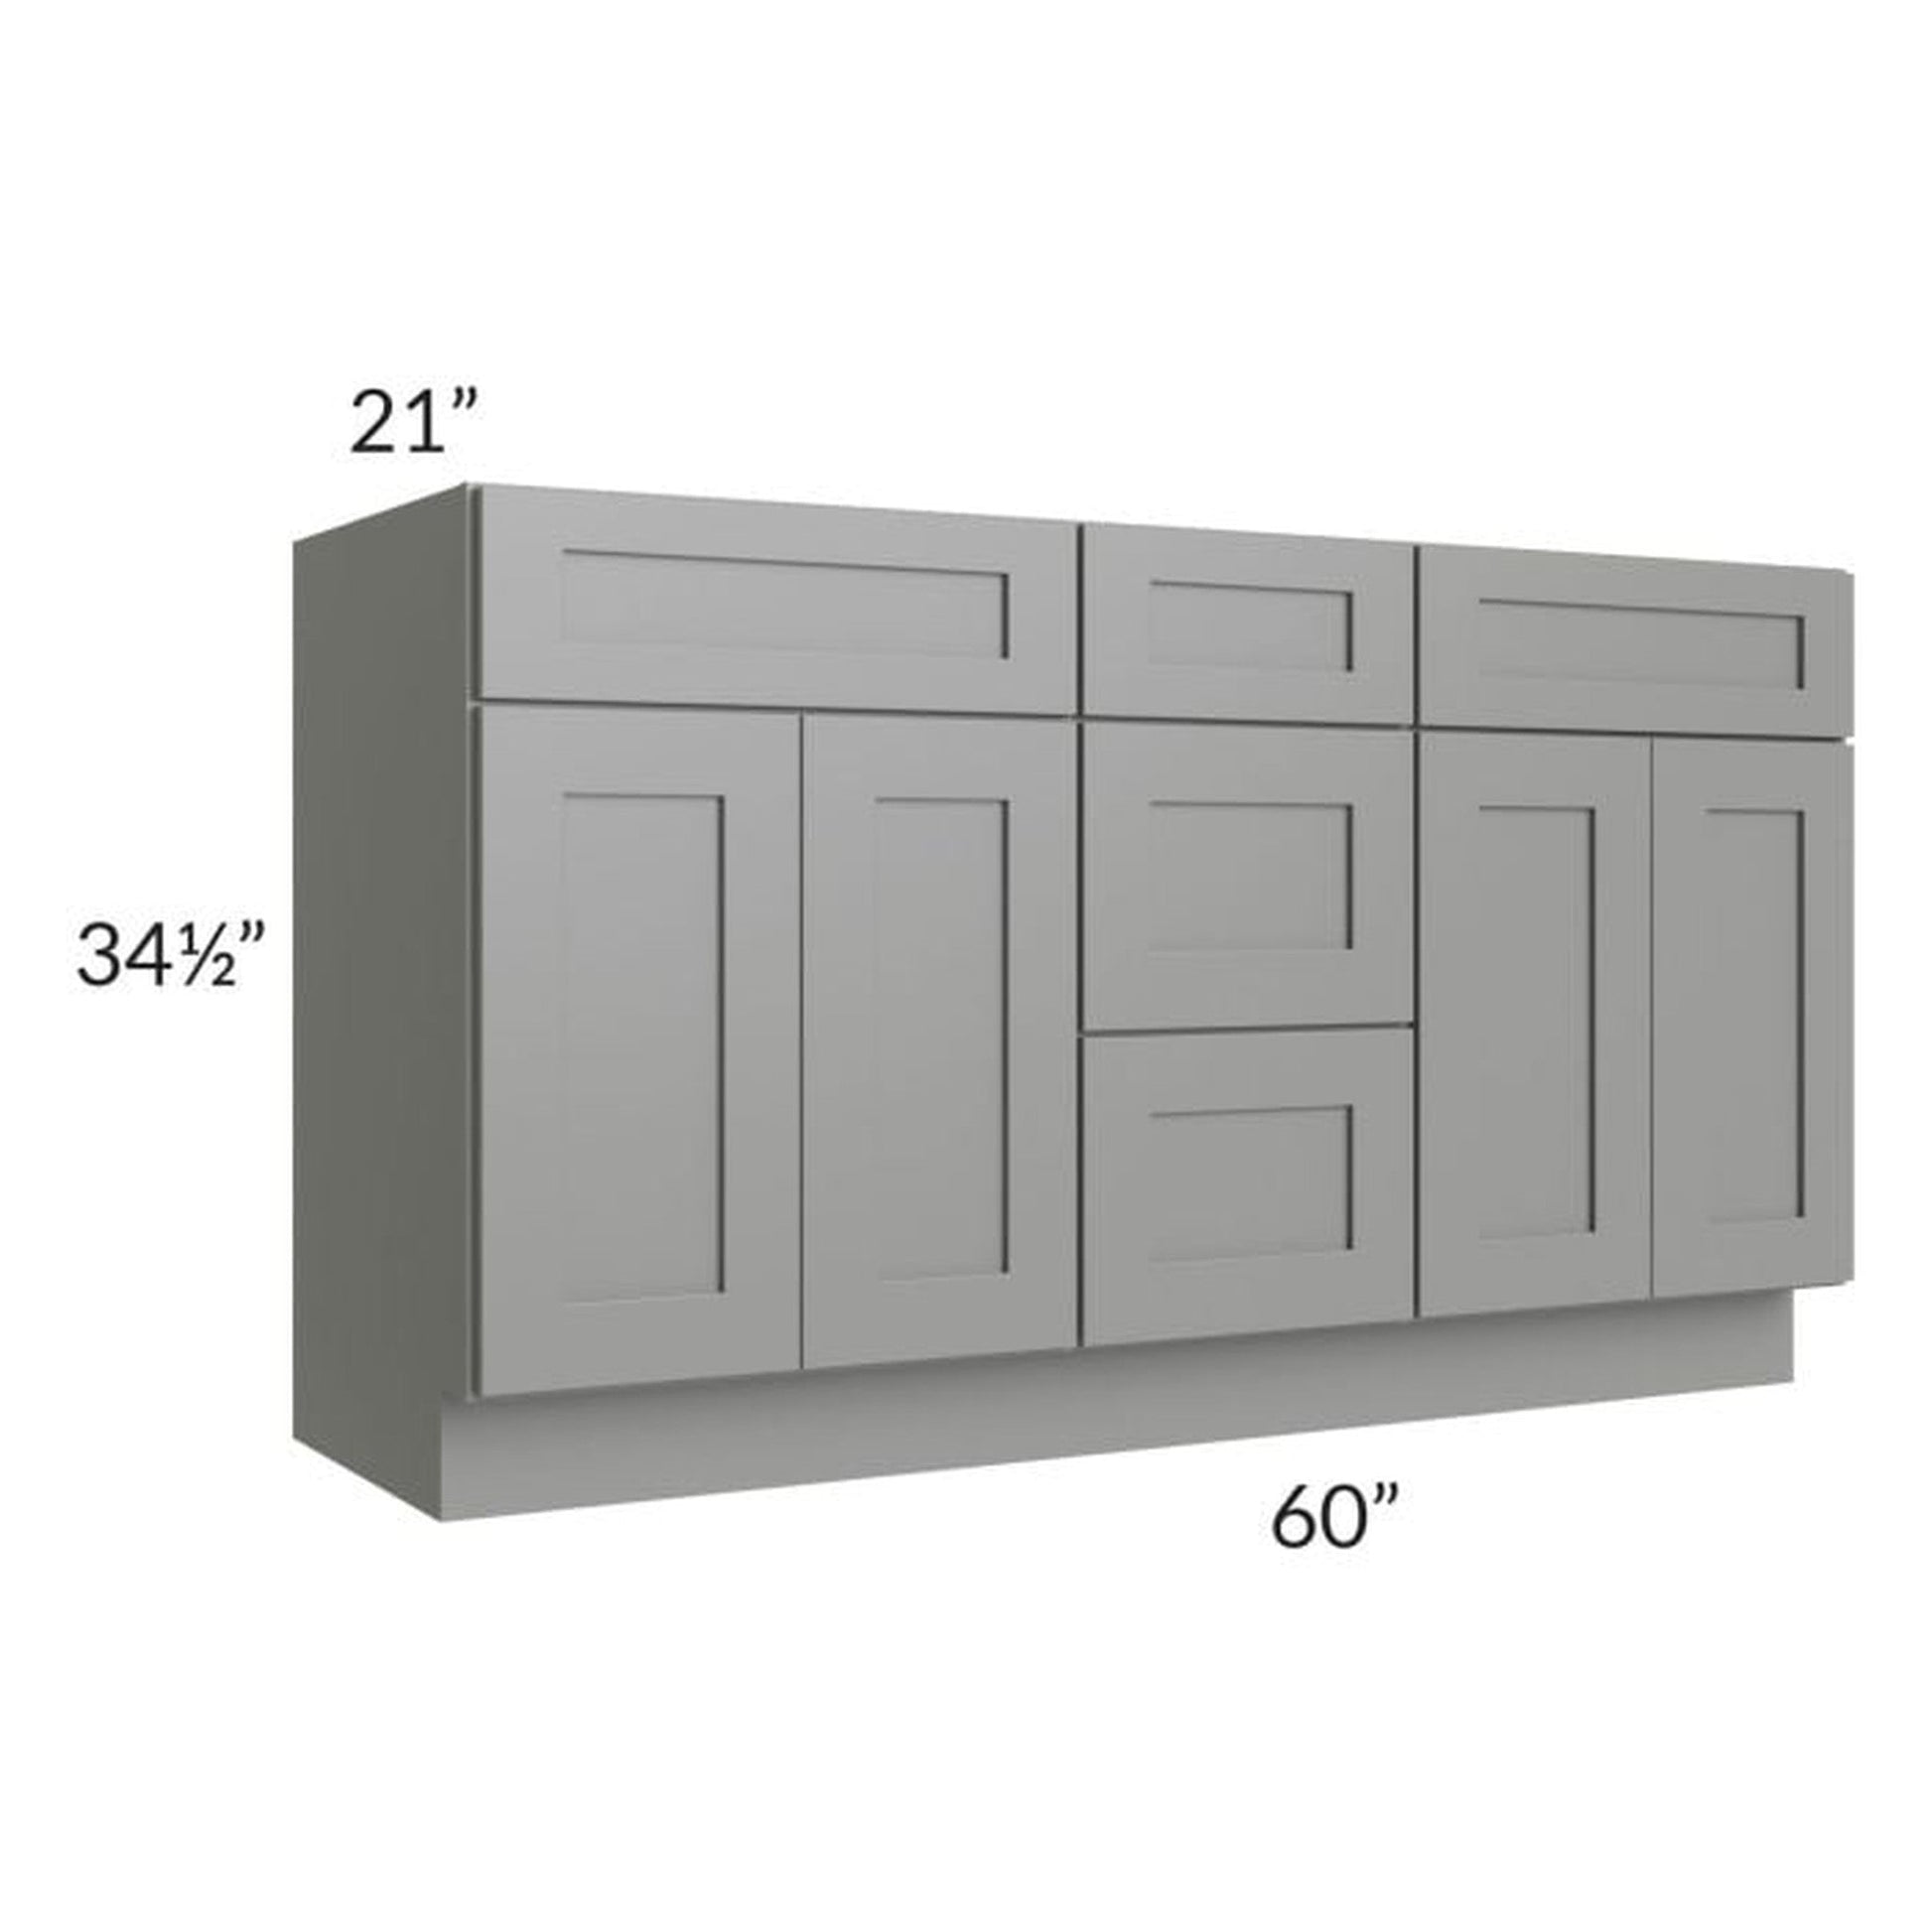 RTA Shale Grey Shaker 60" Vanity Sink Base Cabinet with Drawers with 1 Decorative End Panel